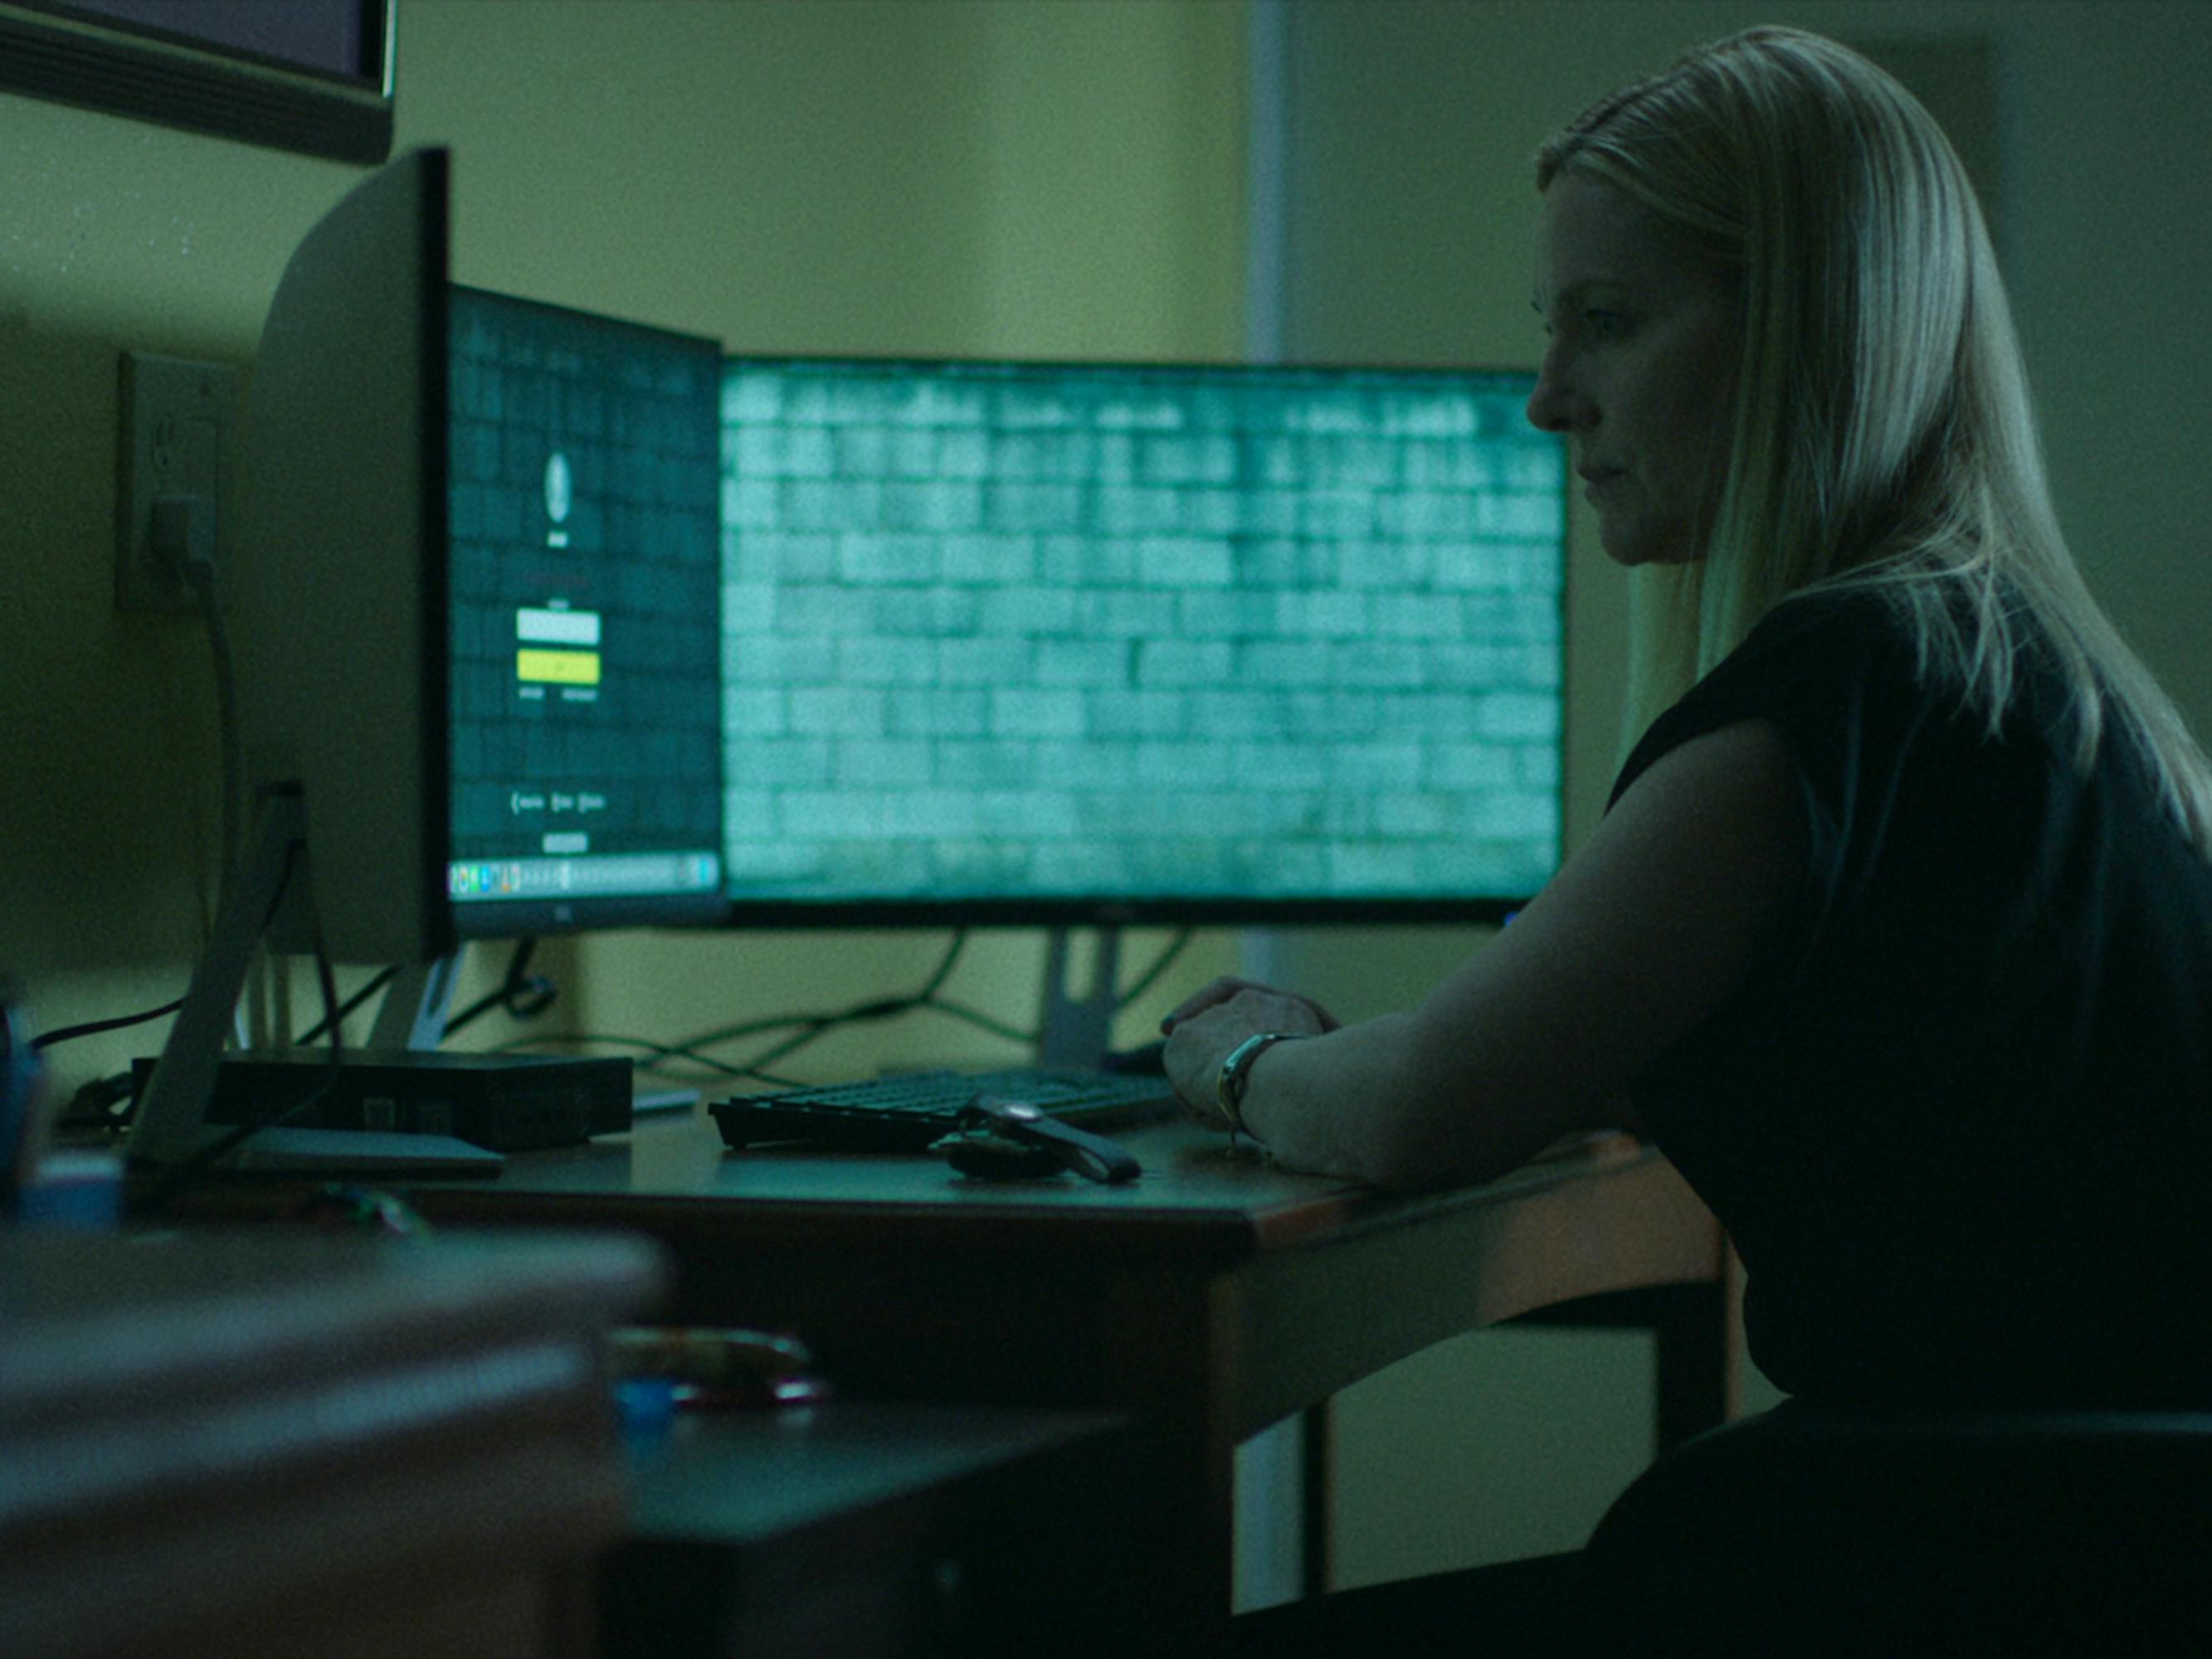 Wendy Byrde (Laura Linney) sits behind a double monitor getting up to something nefarious.